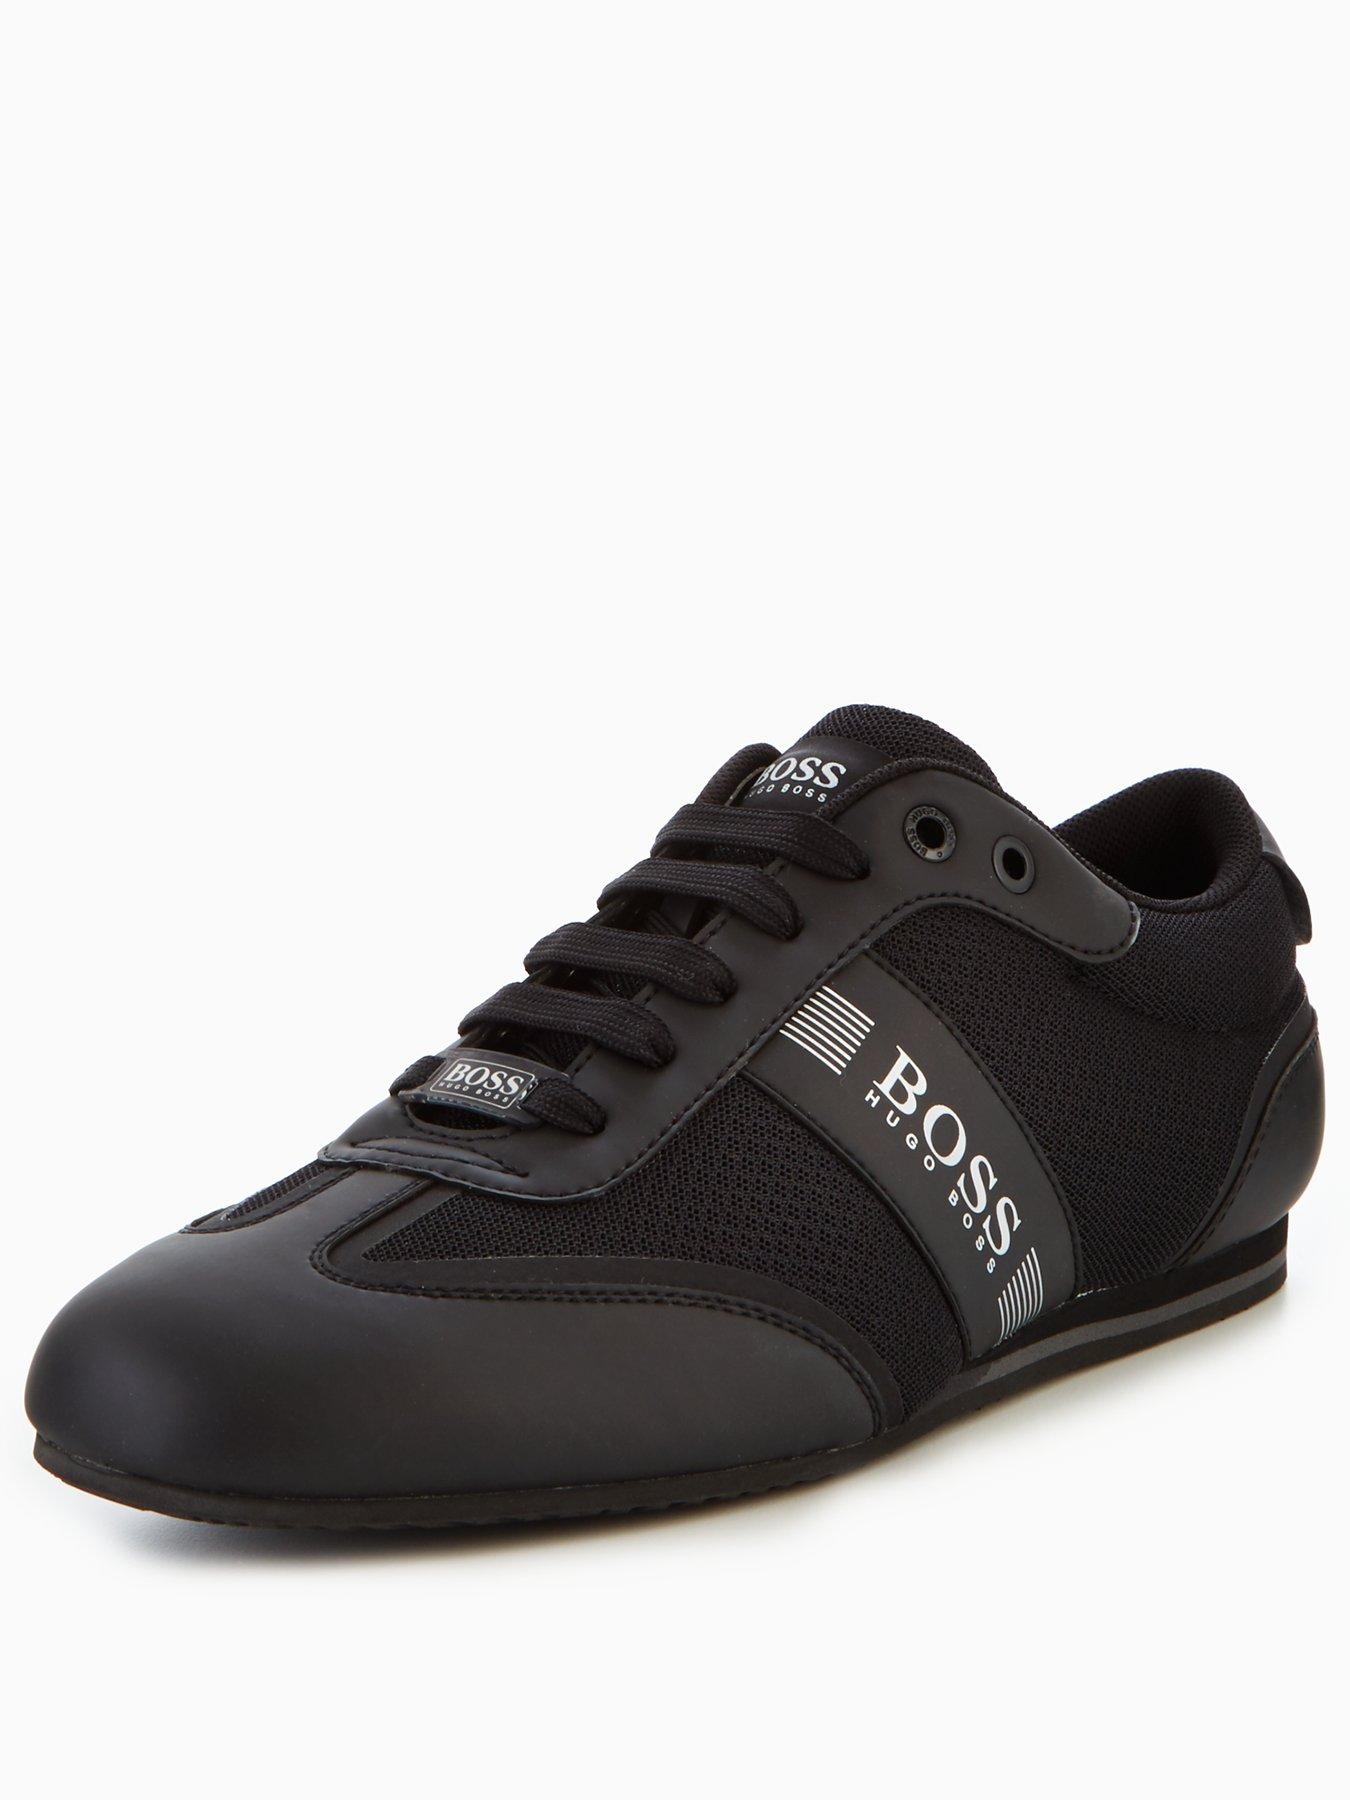 BOSS Green Lighter Low Trainers - Black 